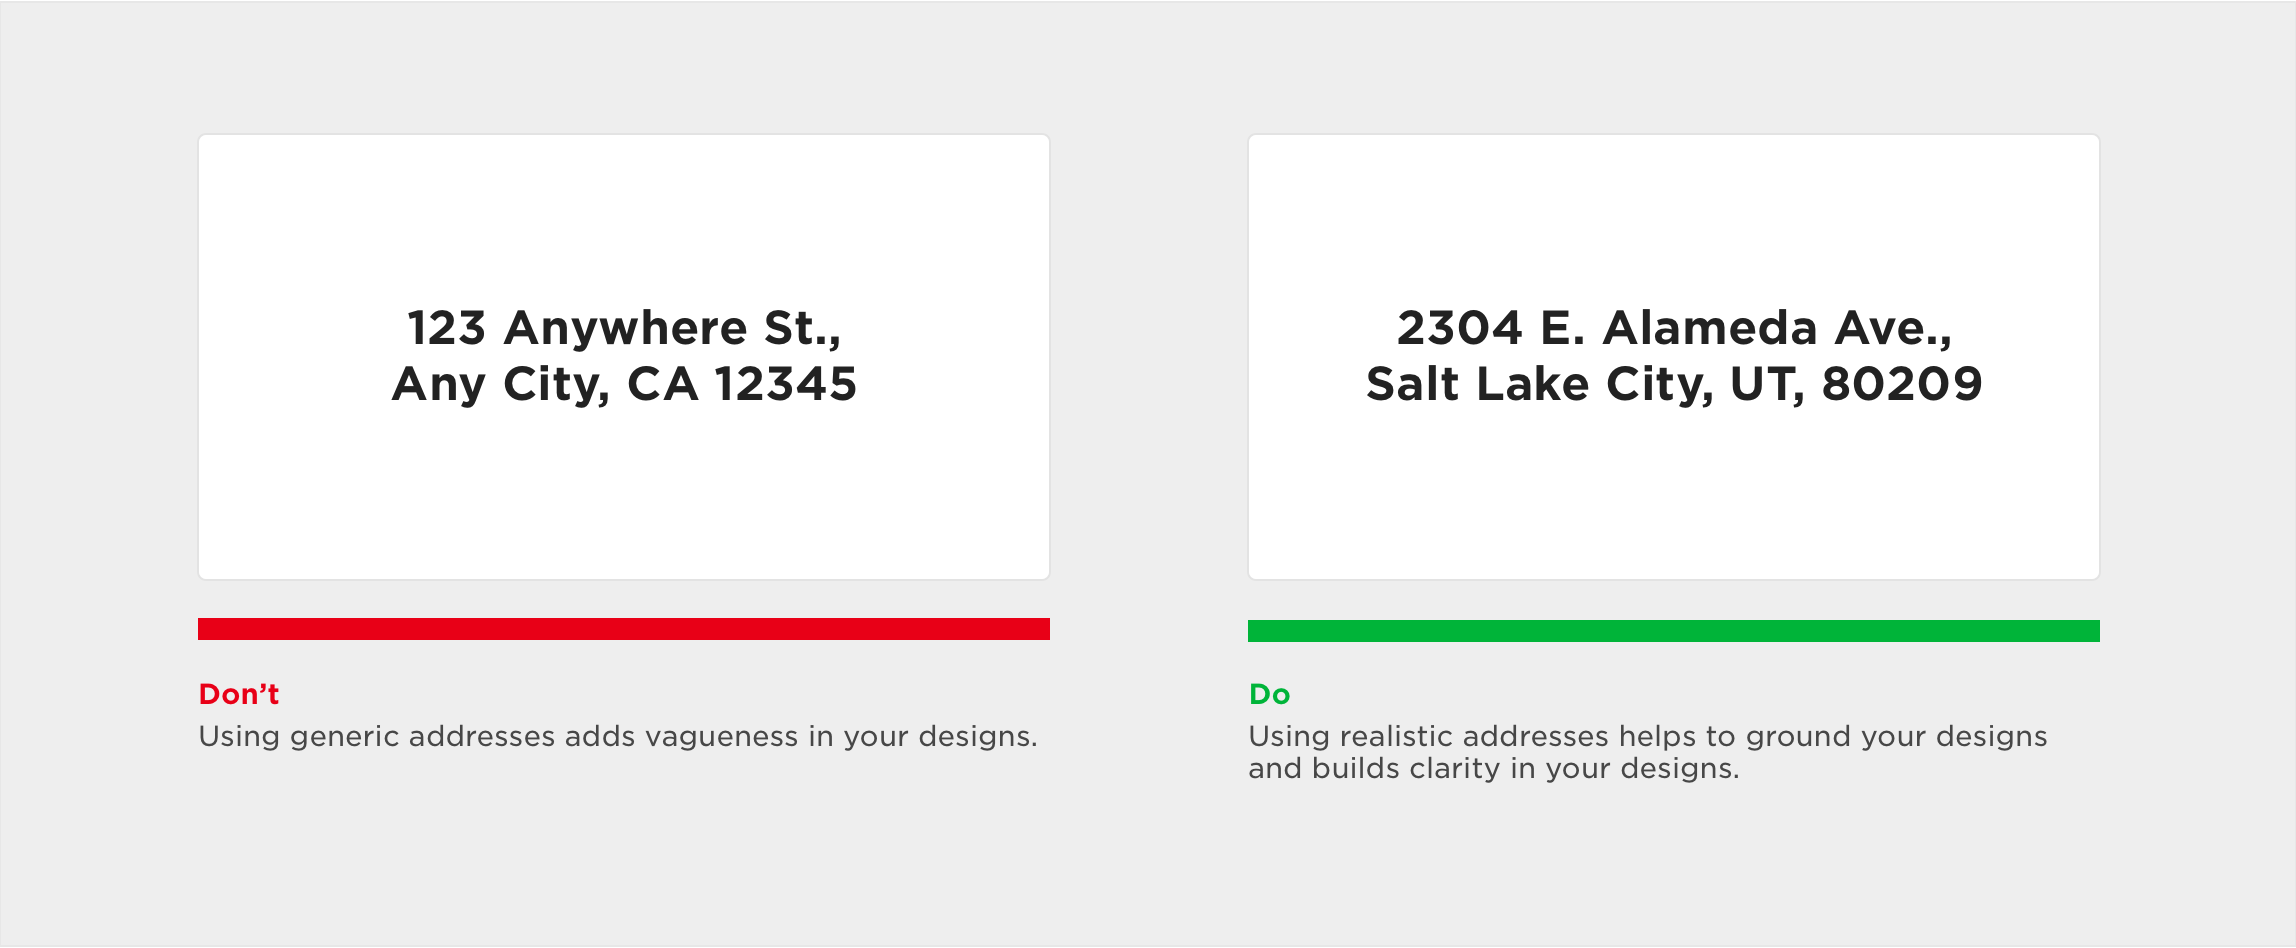 ux-design-guide-to-representing-users-Address.png